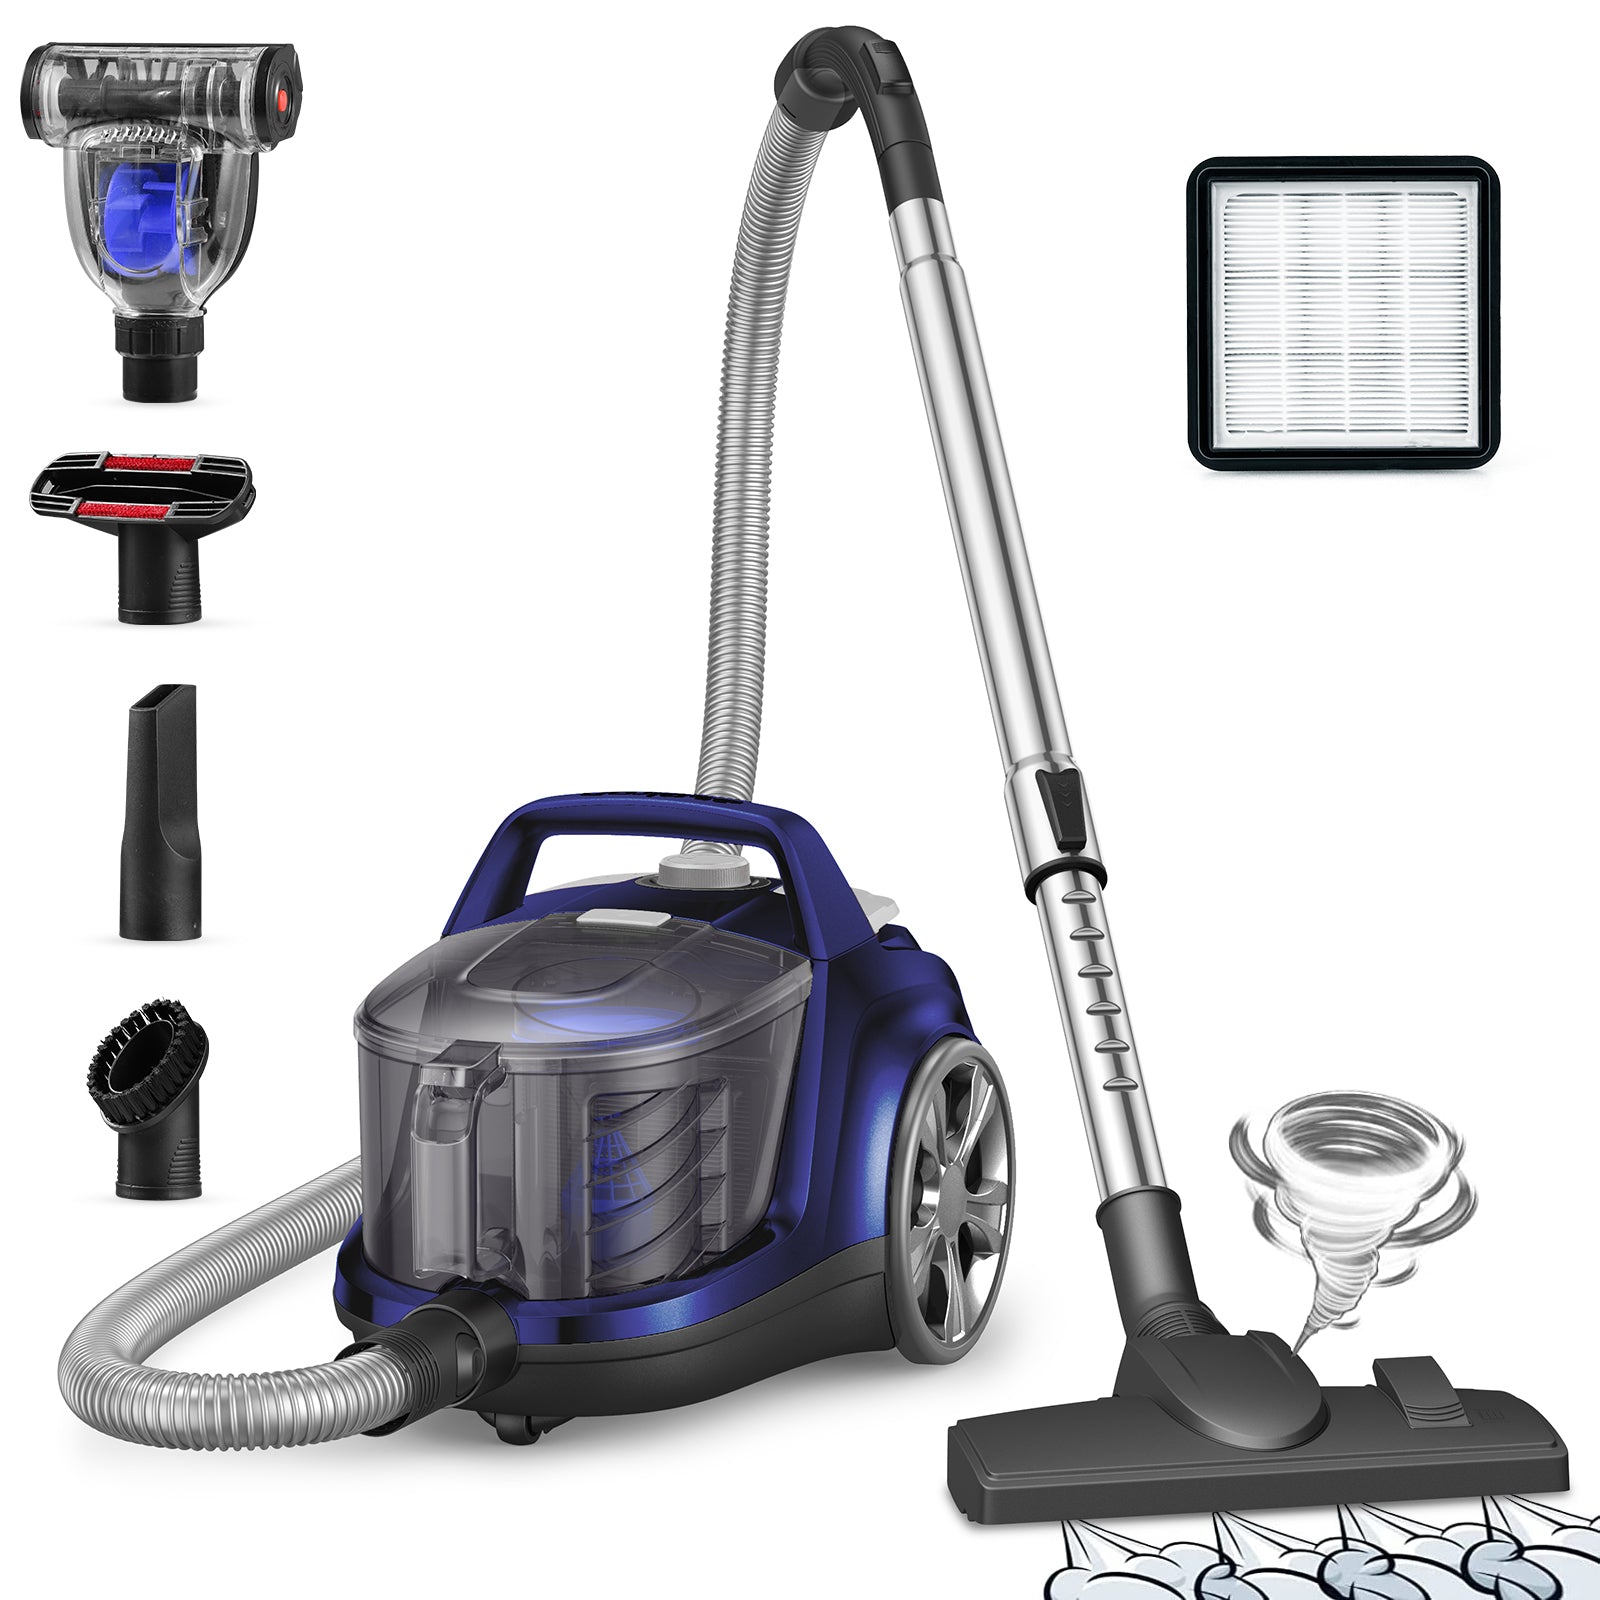 Aspiron Canister Vacuum Cleaner with HEPA Filter for Hard Floors Black